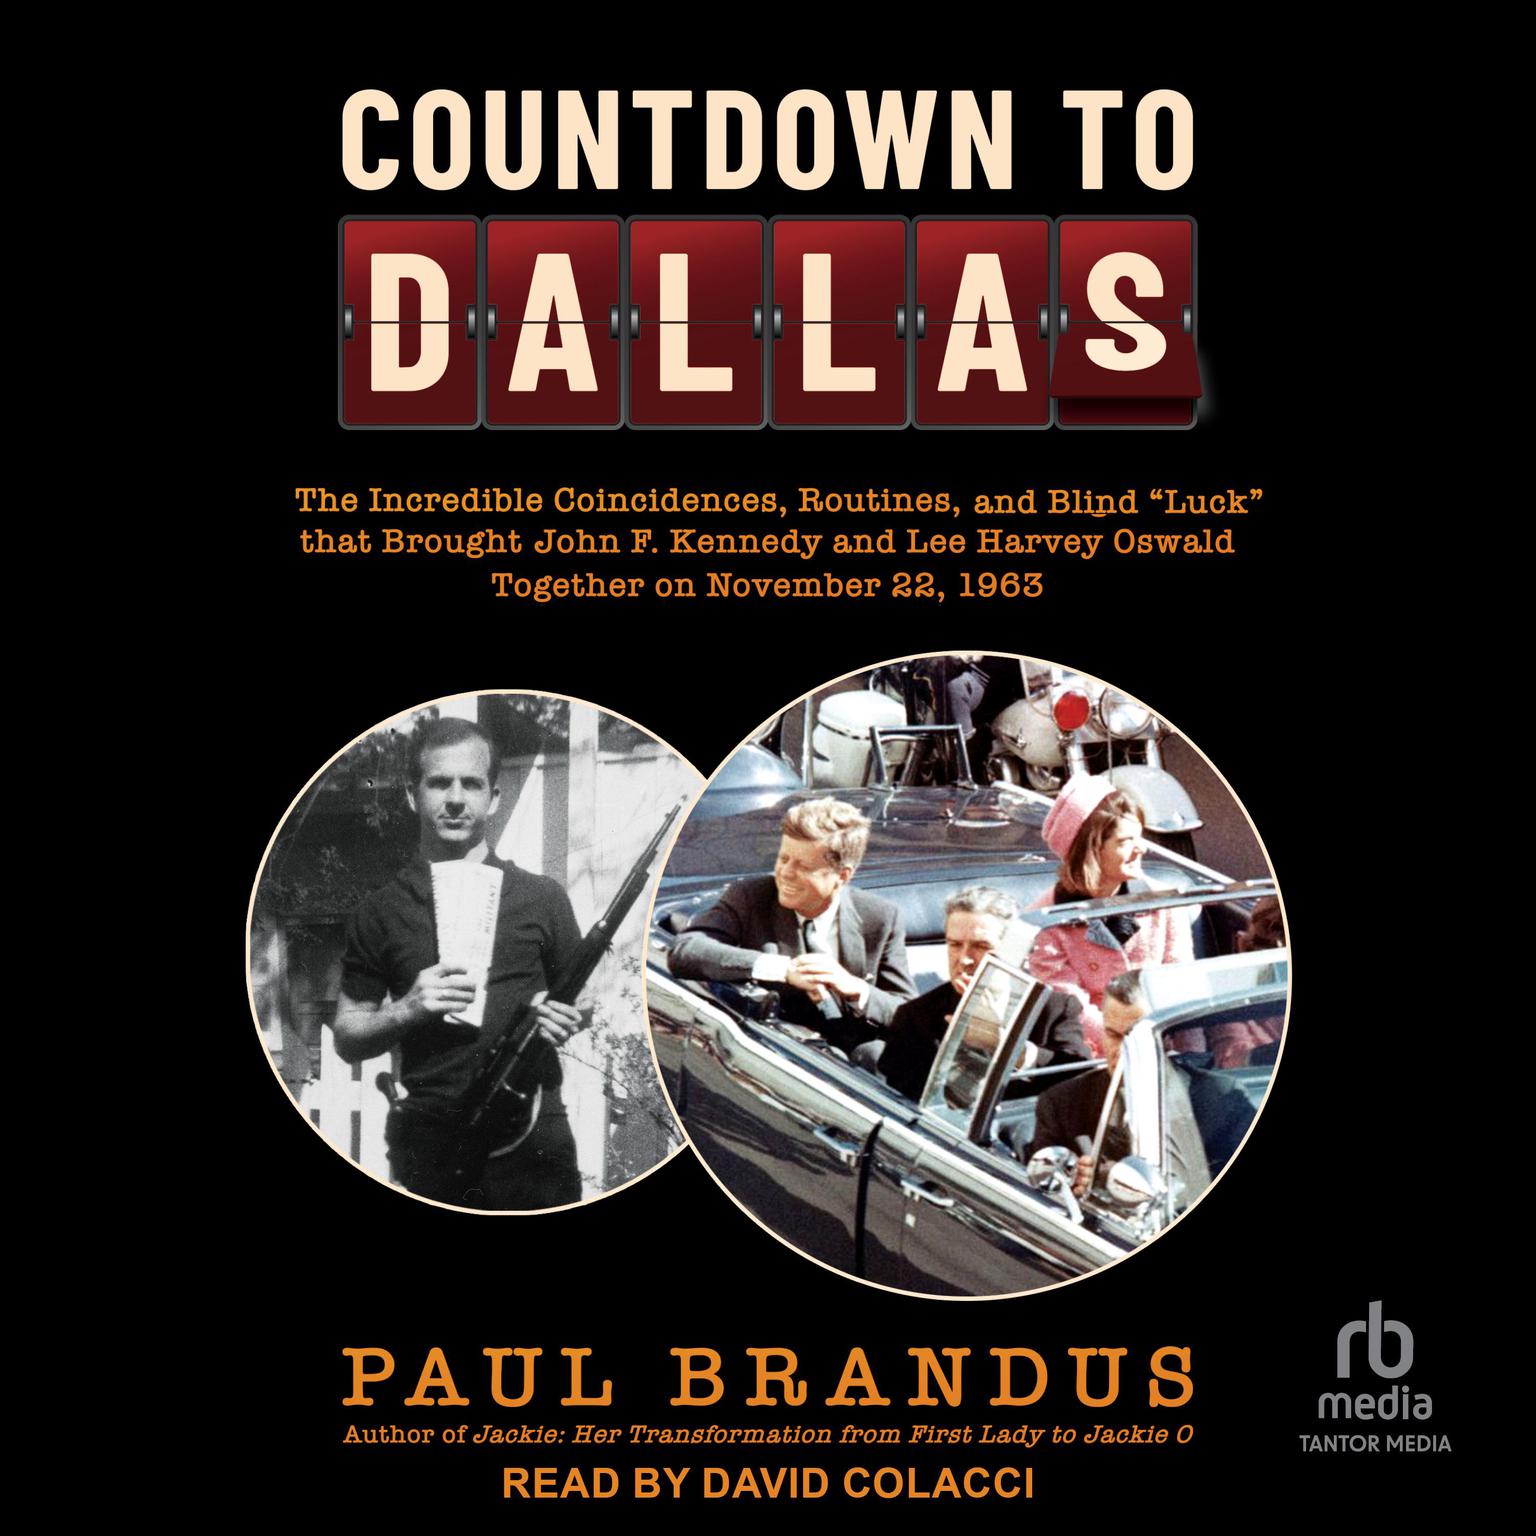 Countdown to Dallas: The Incredible Coincidences, Routines, and Blind Luck that Brought John F. Kennedy and Lee Harvey Oswald Together on November 22, 1963 Audiobook, by Paul Brandus